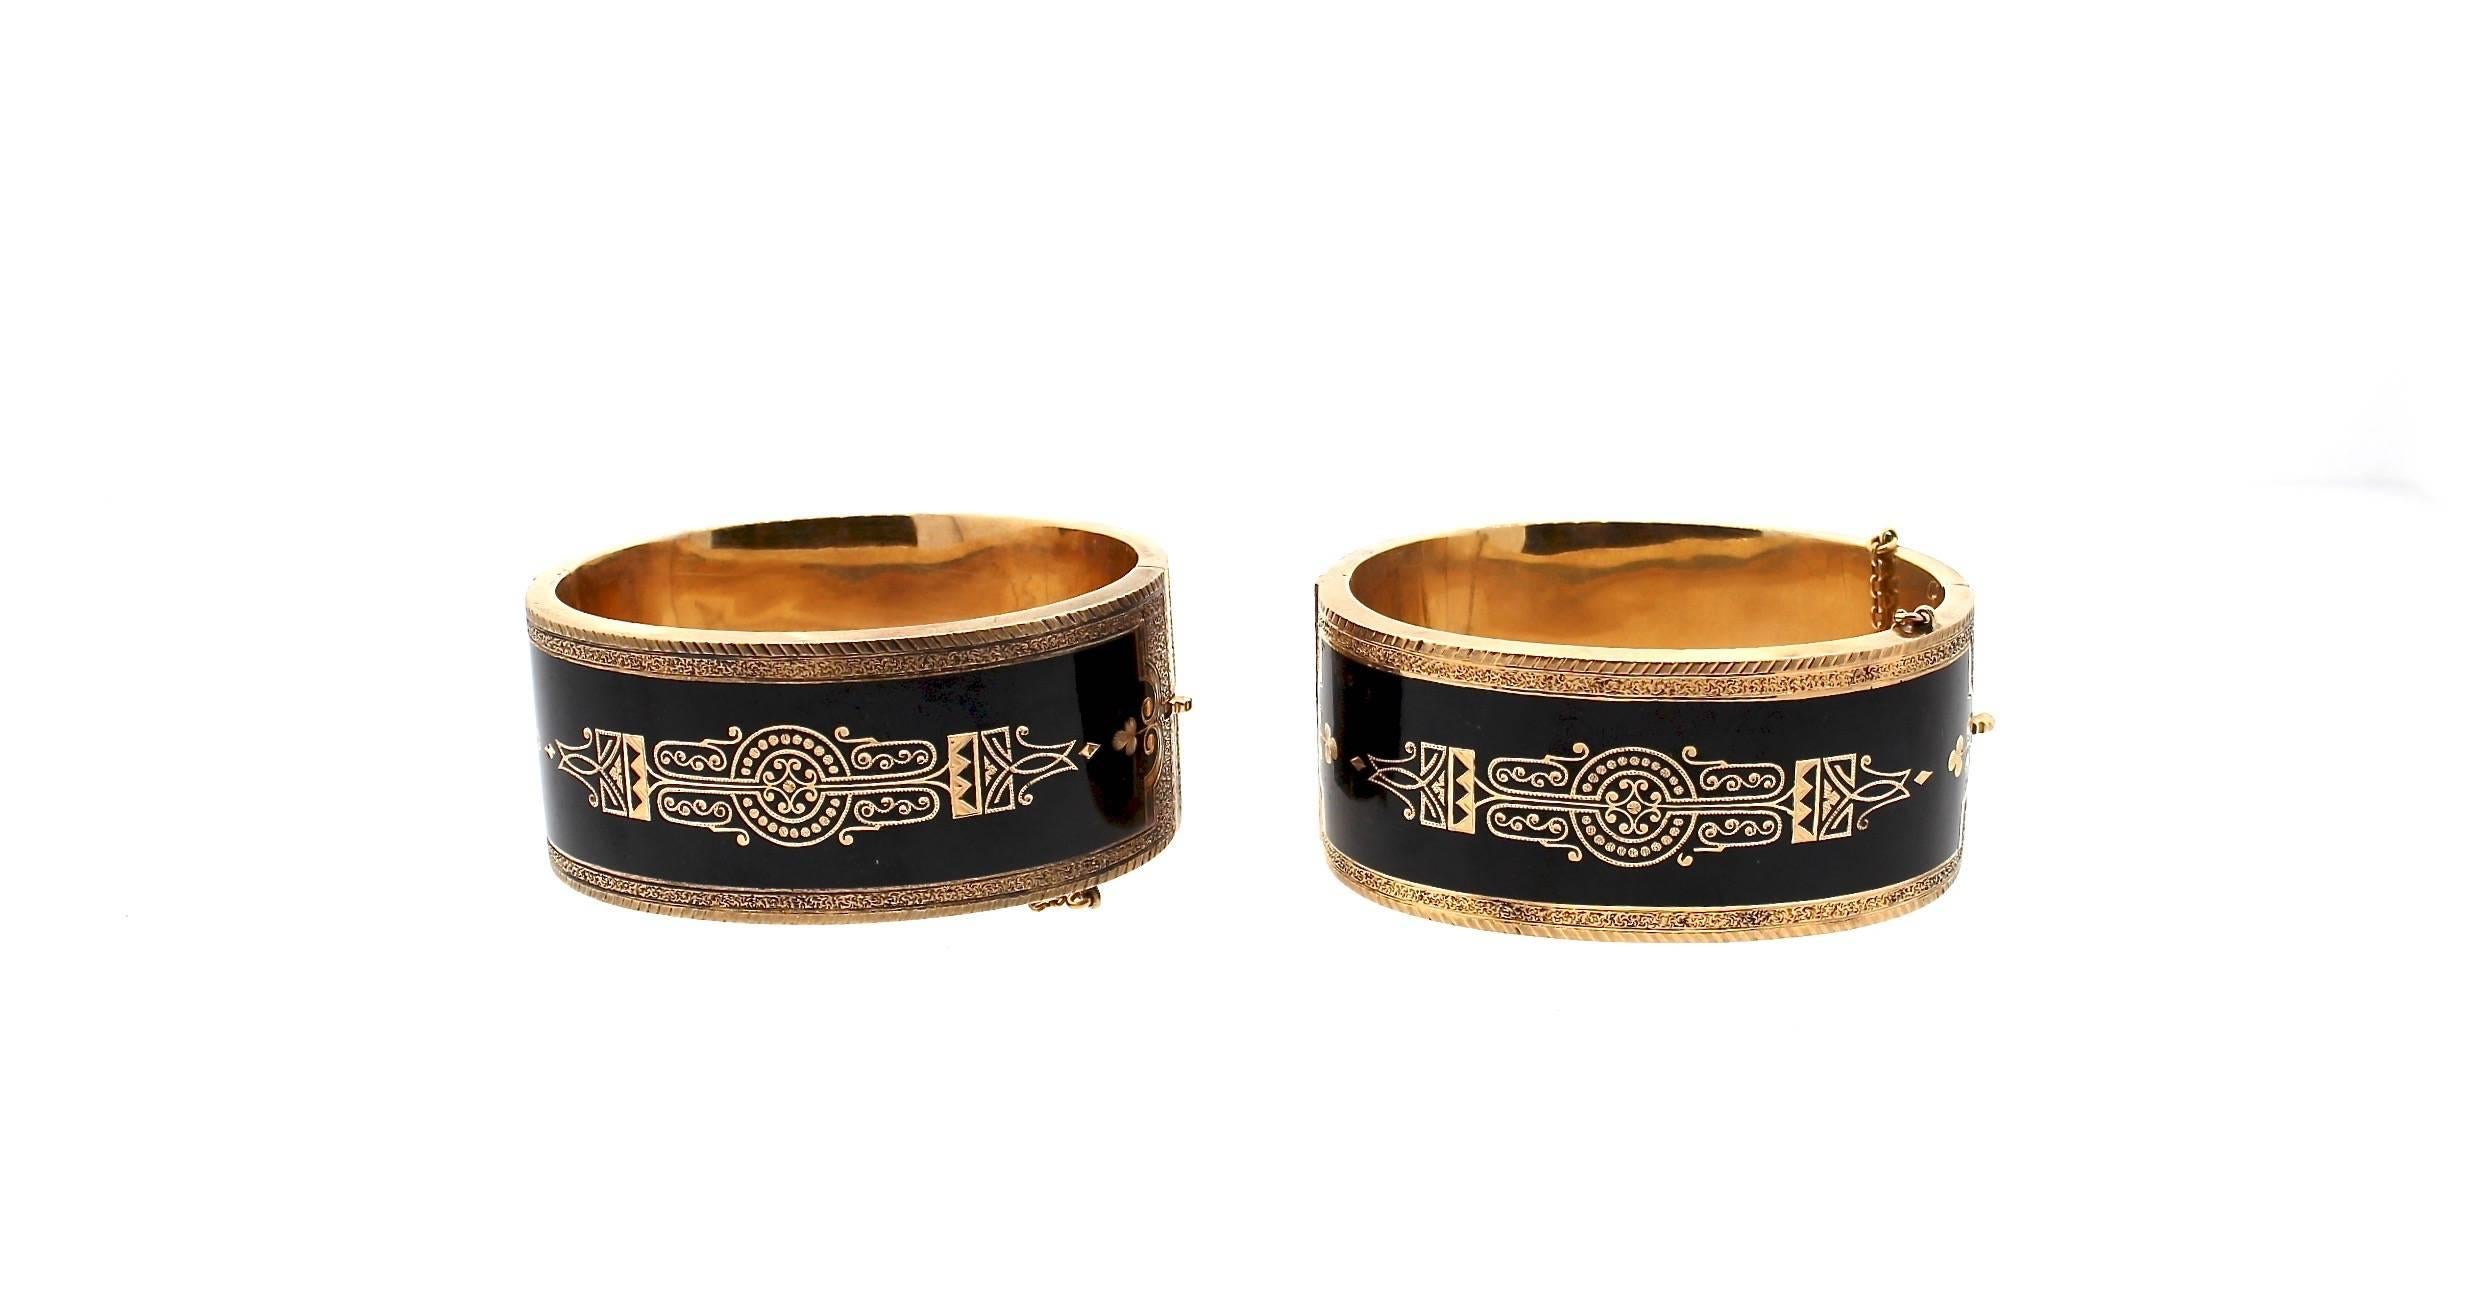 A rare Victorian pair of black enamel 14k yellow gold mourning bangles with gorgeous floral and geometric designs.  This fine pair dates to about 1860 and has floral scrollwork on one side, and a geometric design on the other.  The bracelets hinge